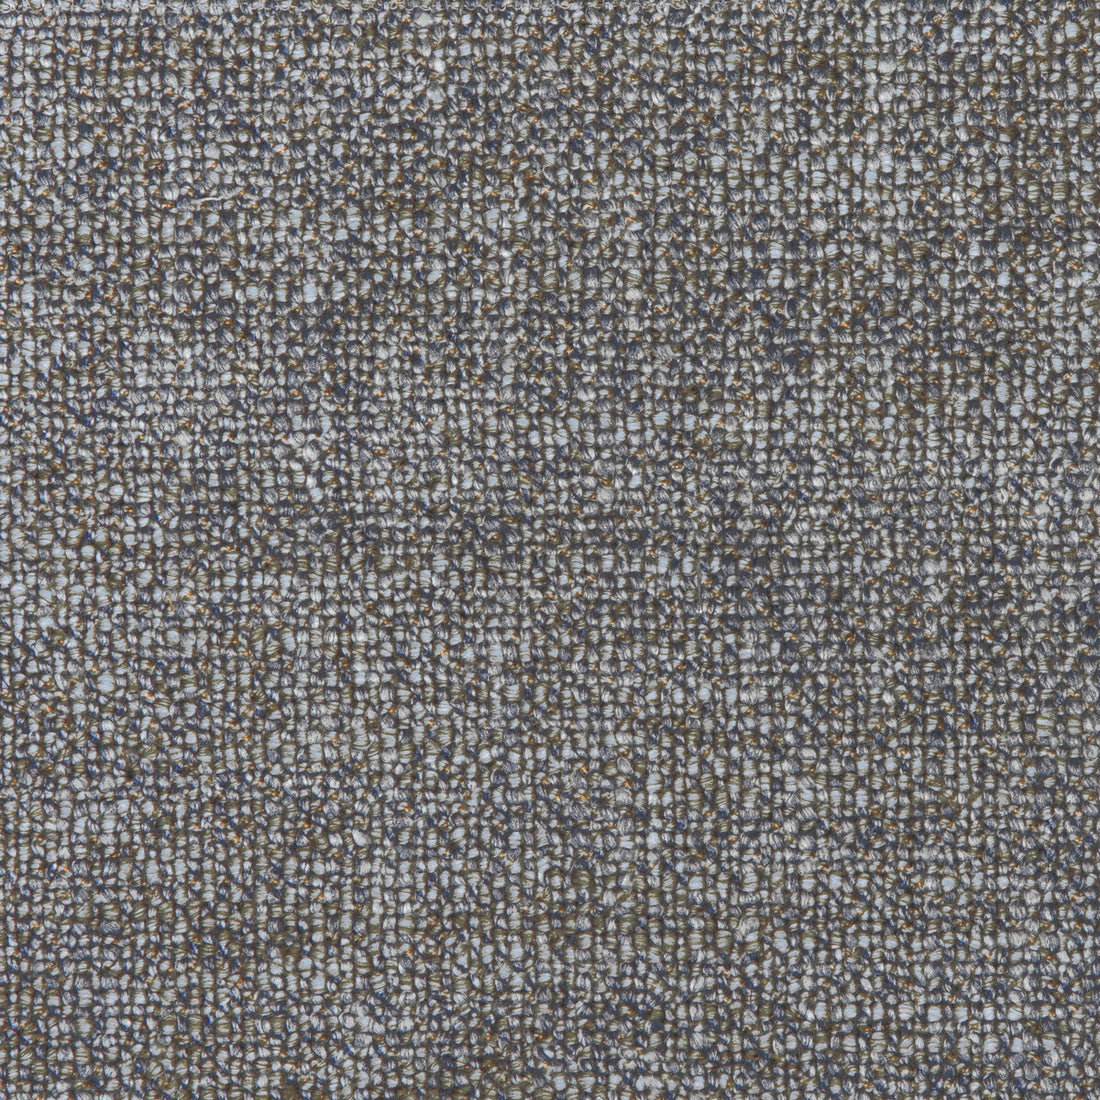 Hapi Texture fabric in iron color - pattern 35872.21.0 - by Kravet Couture in the Windsor Smith Naila collection